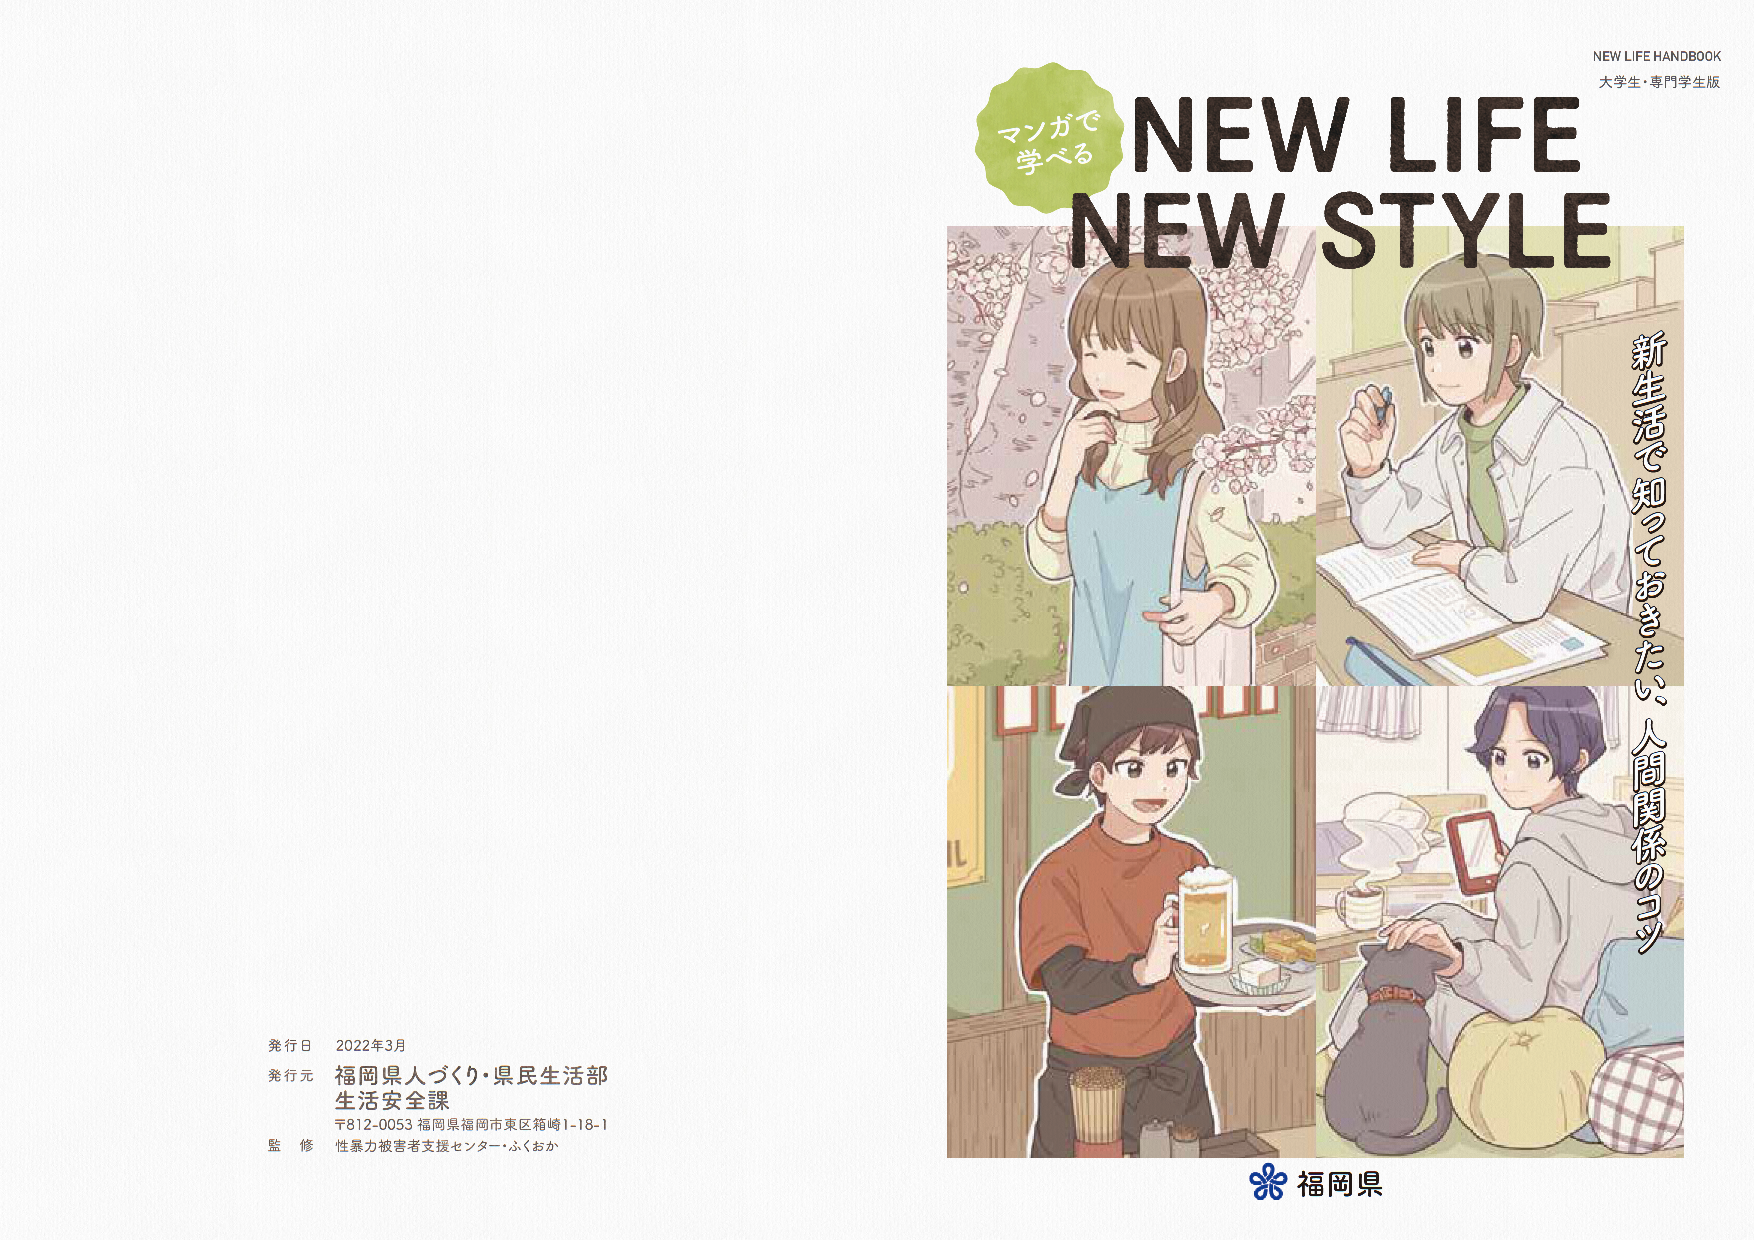 「NEW LIFE NEW STYLE」表紙